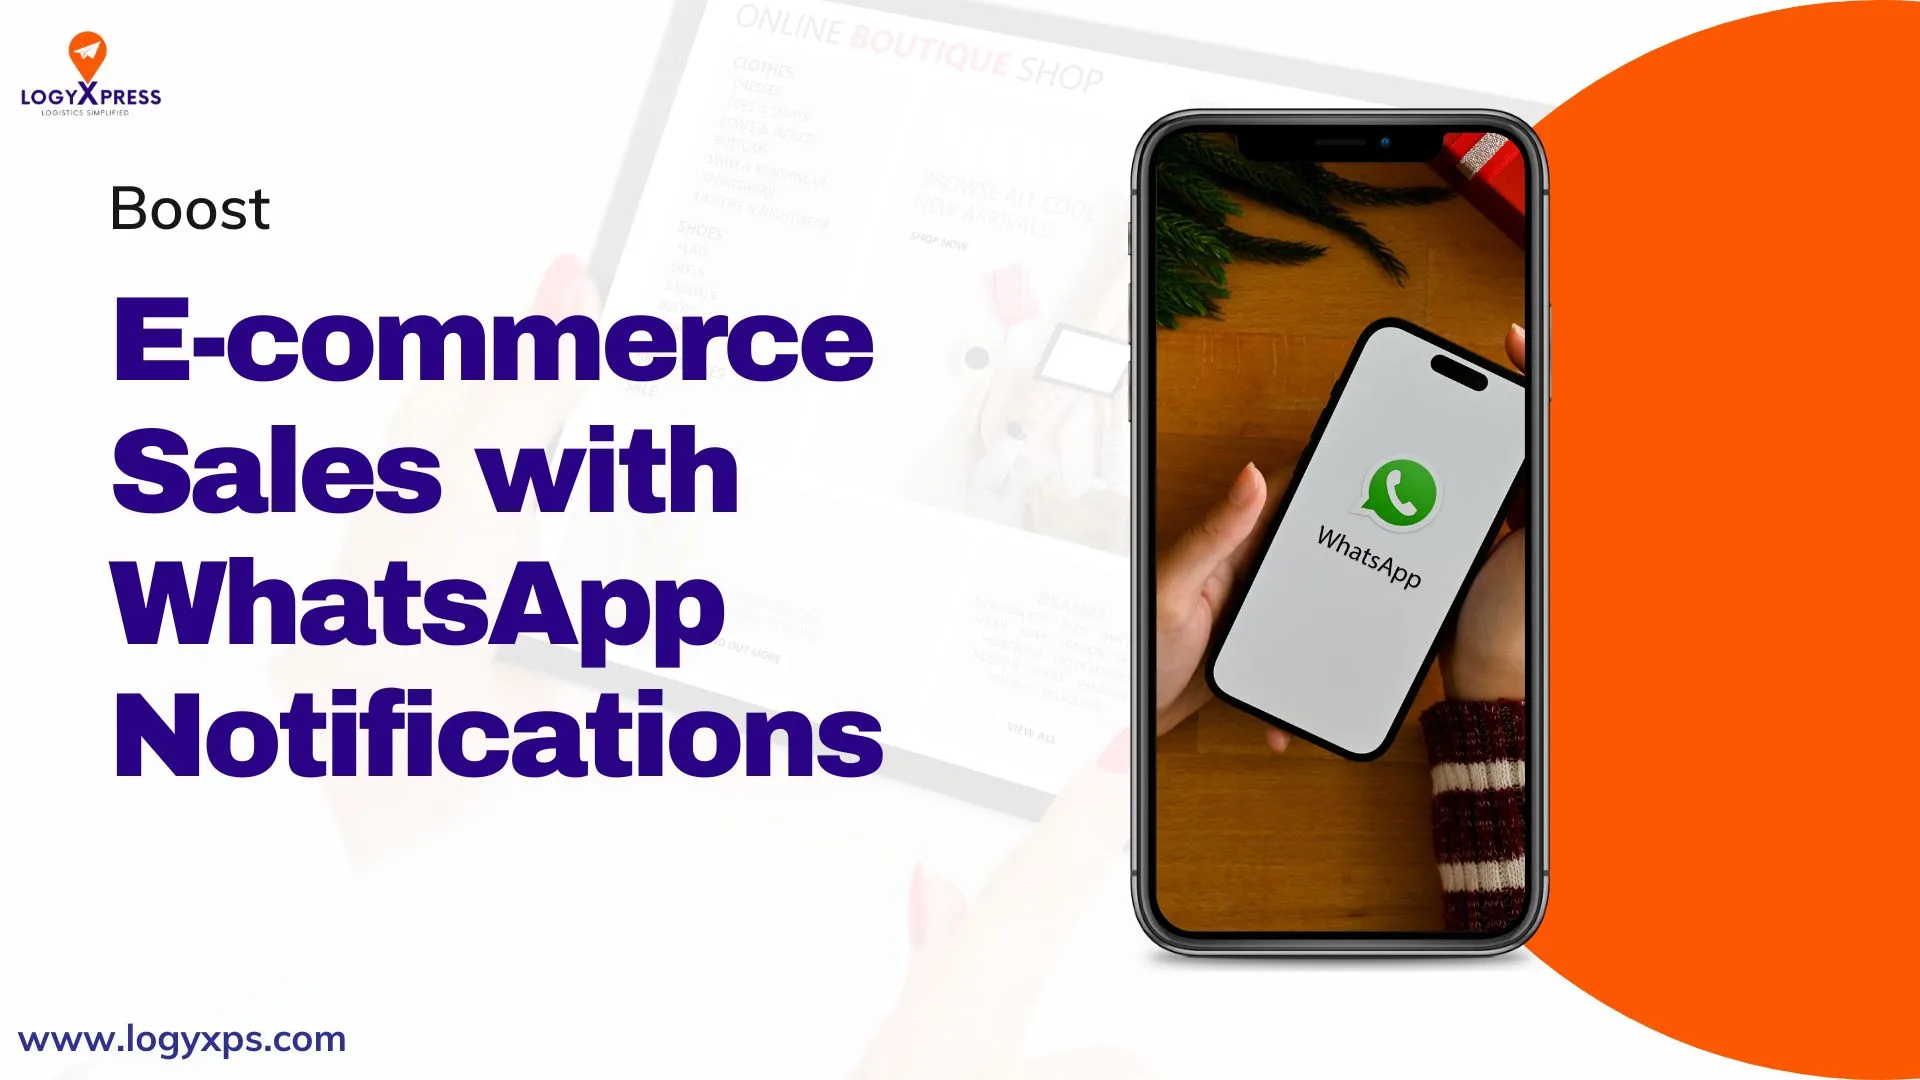 Boost E-commerce Sales with WhatsApp Notifications